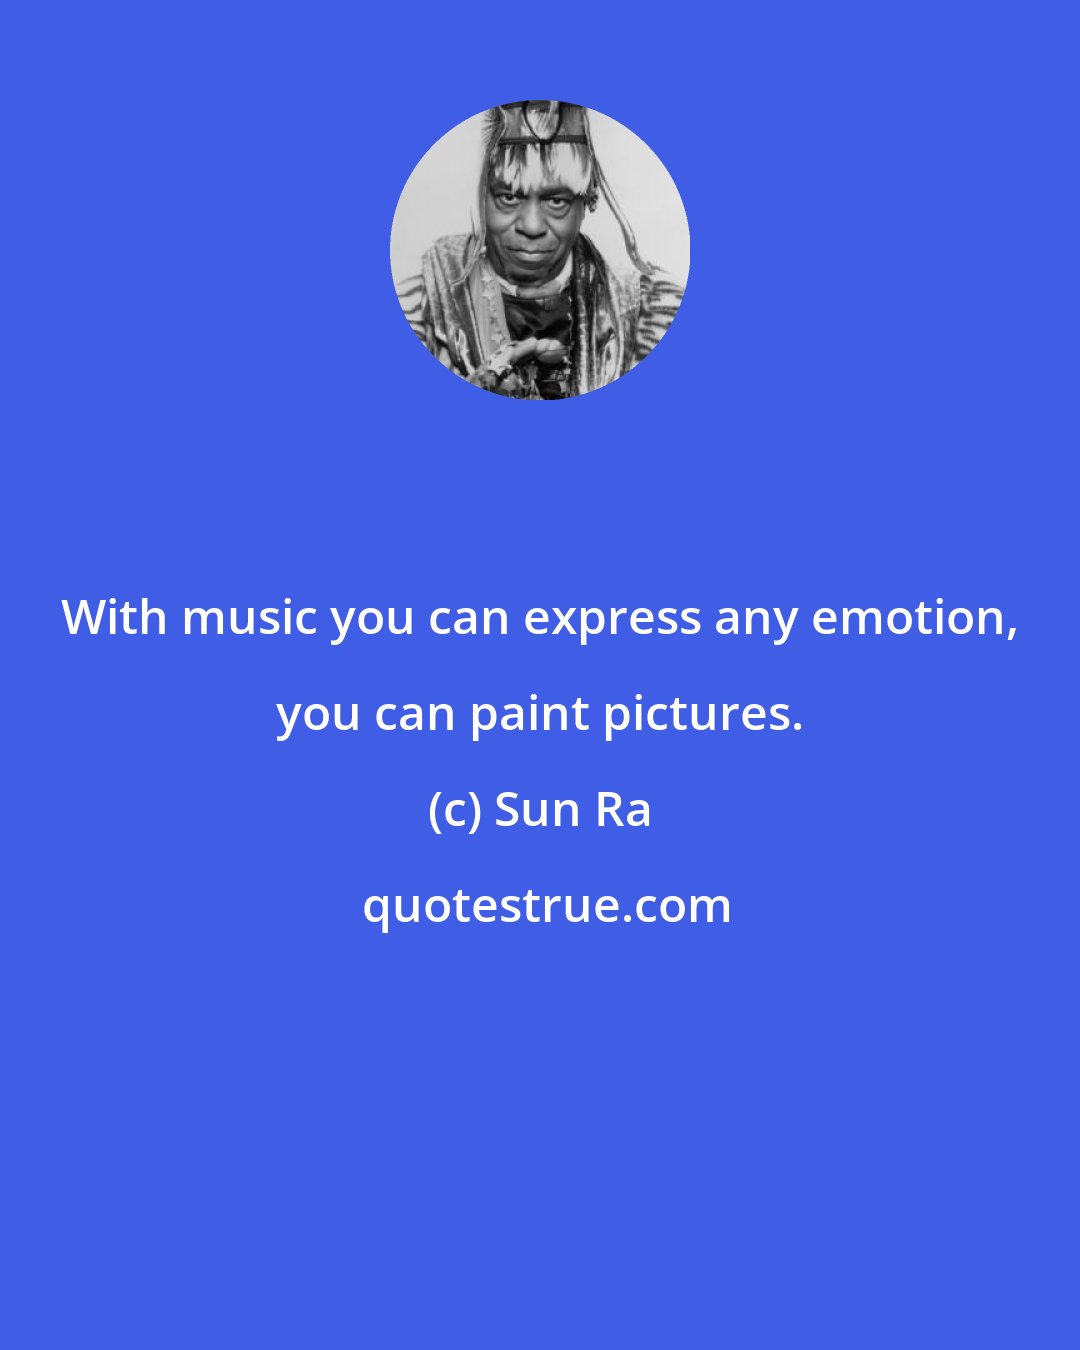 Sun Ra: With music you can express any emotion, you can paint pictures.